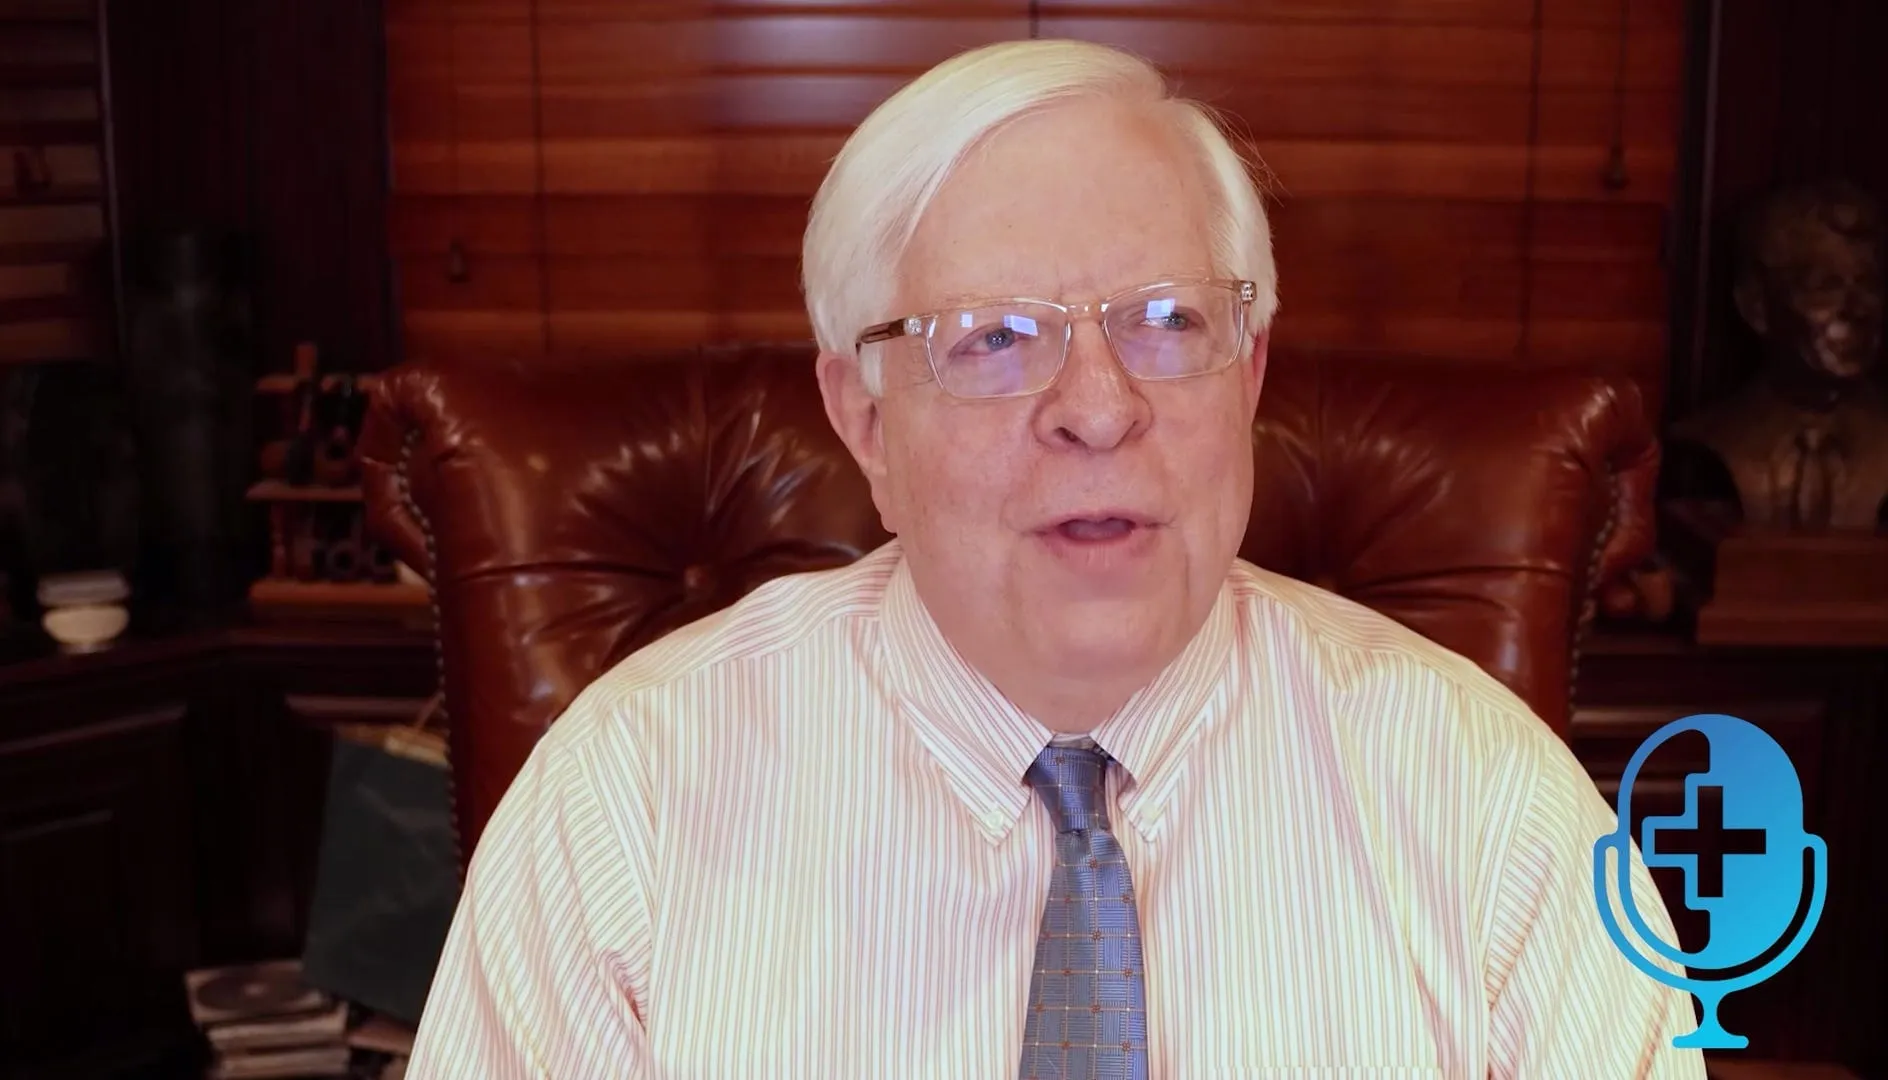 Dennis Prager seated behind his desk at home in Los Angeles